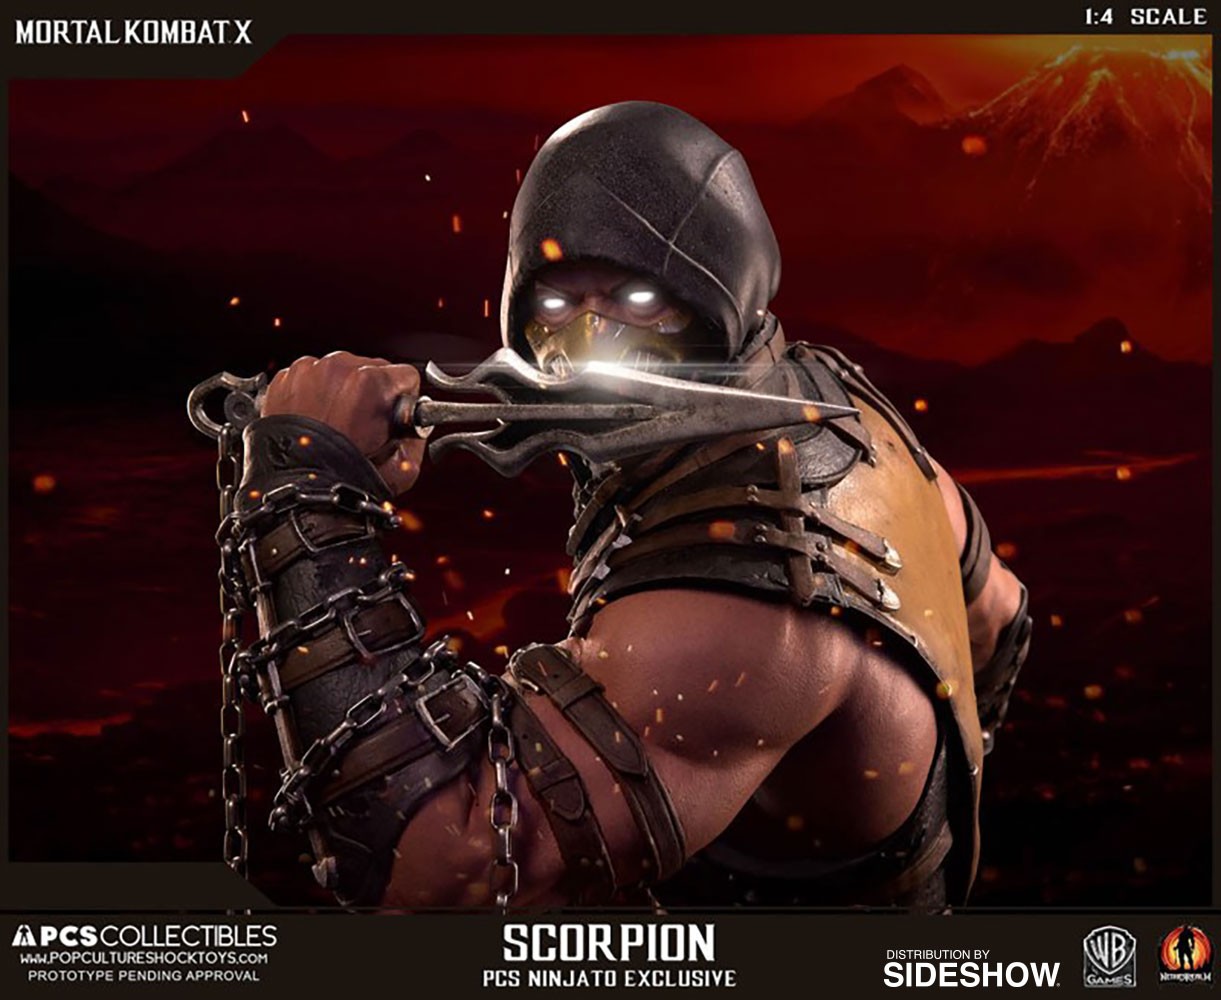 Scorpion Exclusive Edition View 19